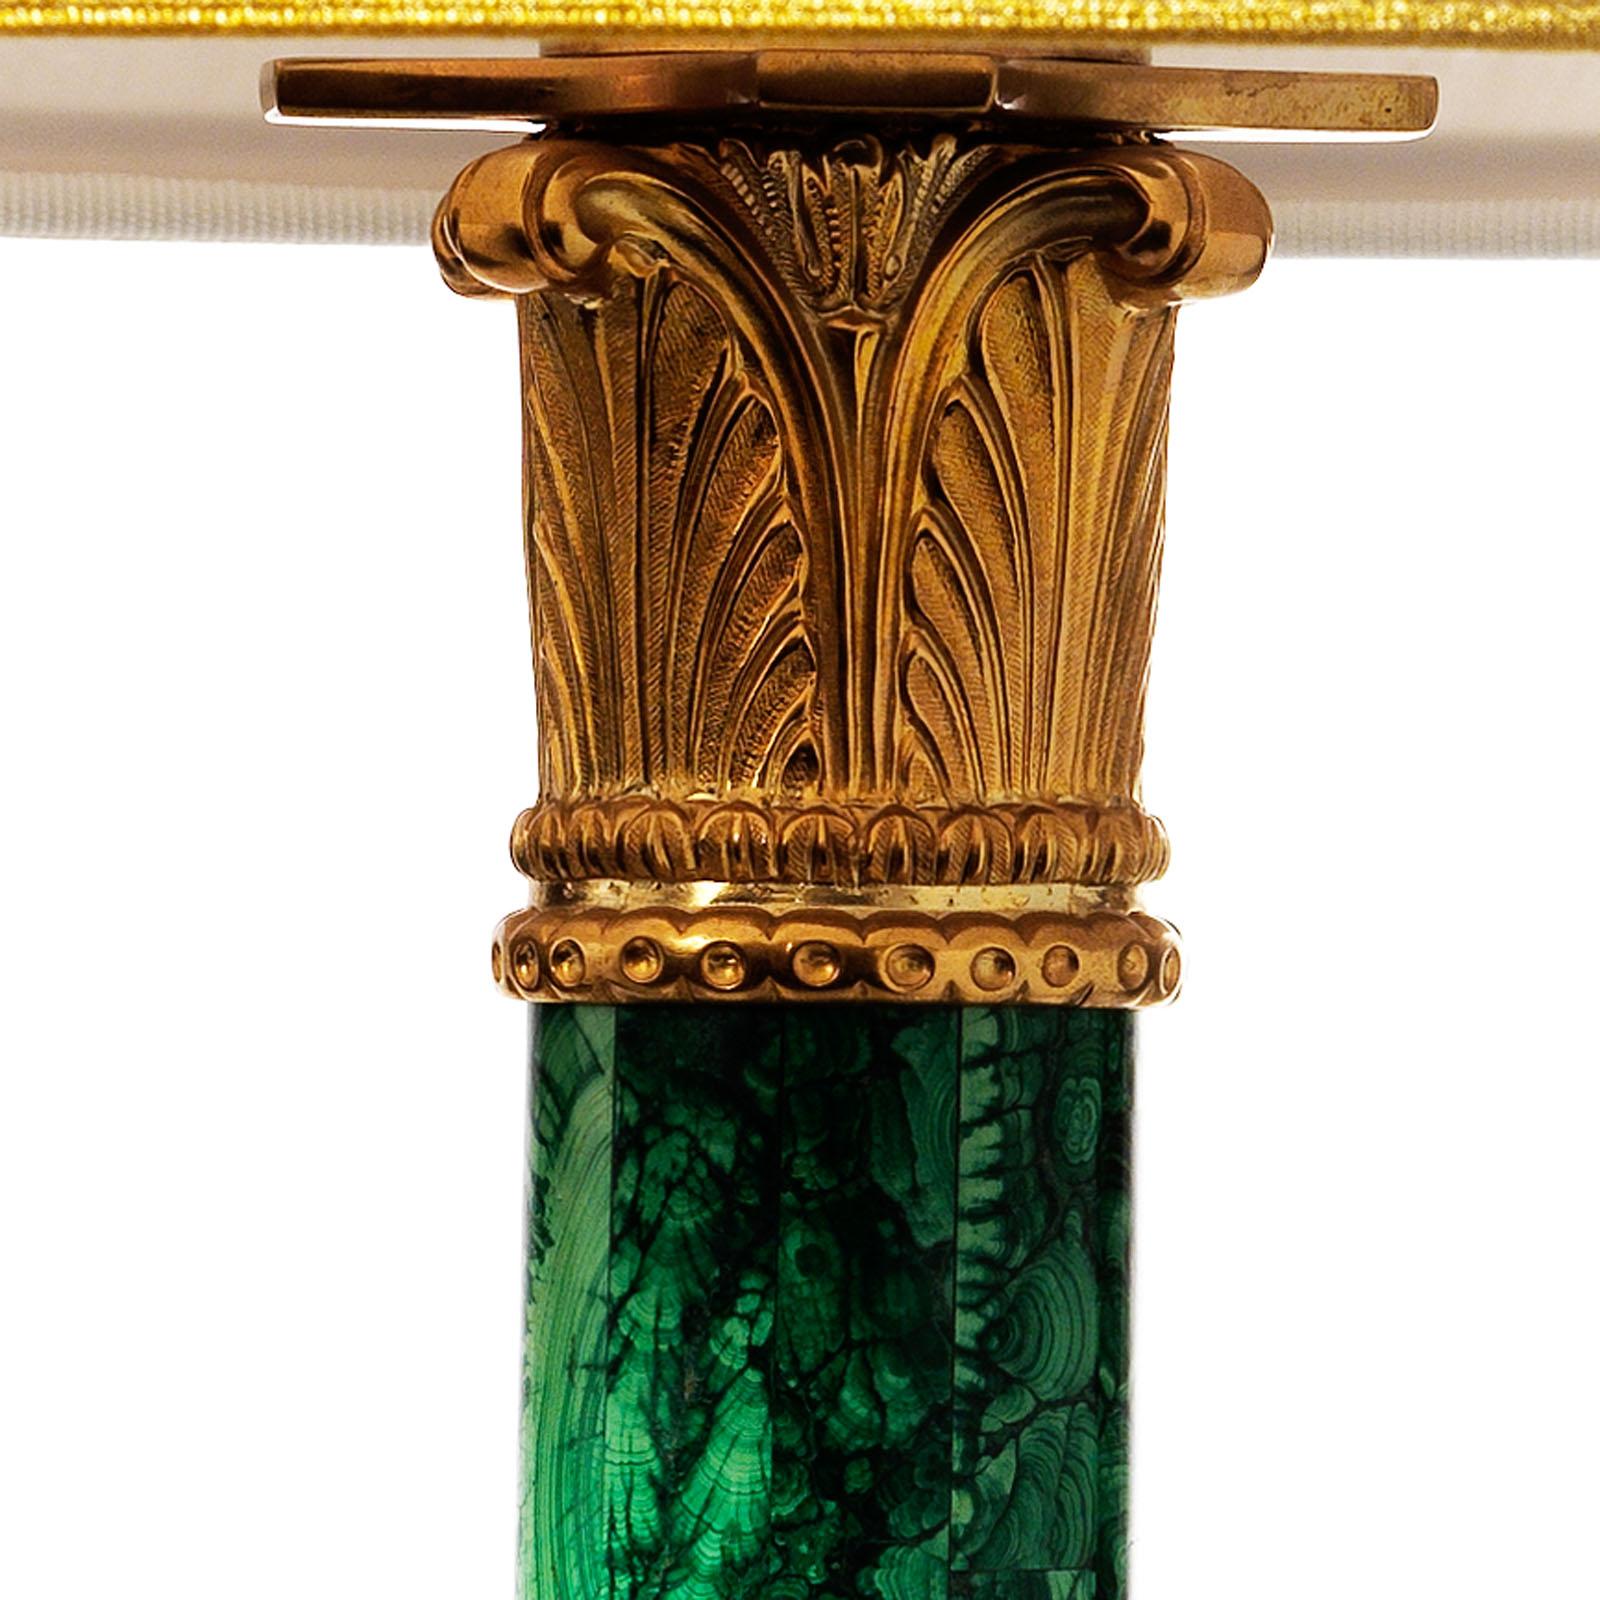 Louis XVI style malachite and gilt bronze column table lamp by Gherardo Degli Albizzi.
This lamp has a very refined design featured by a classic vegetal motif capital and masks inscribed in vegetal festoons. Malachite veneer work, with its